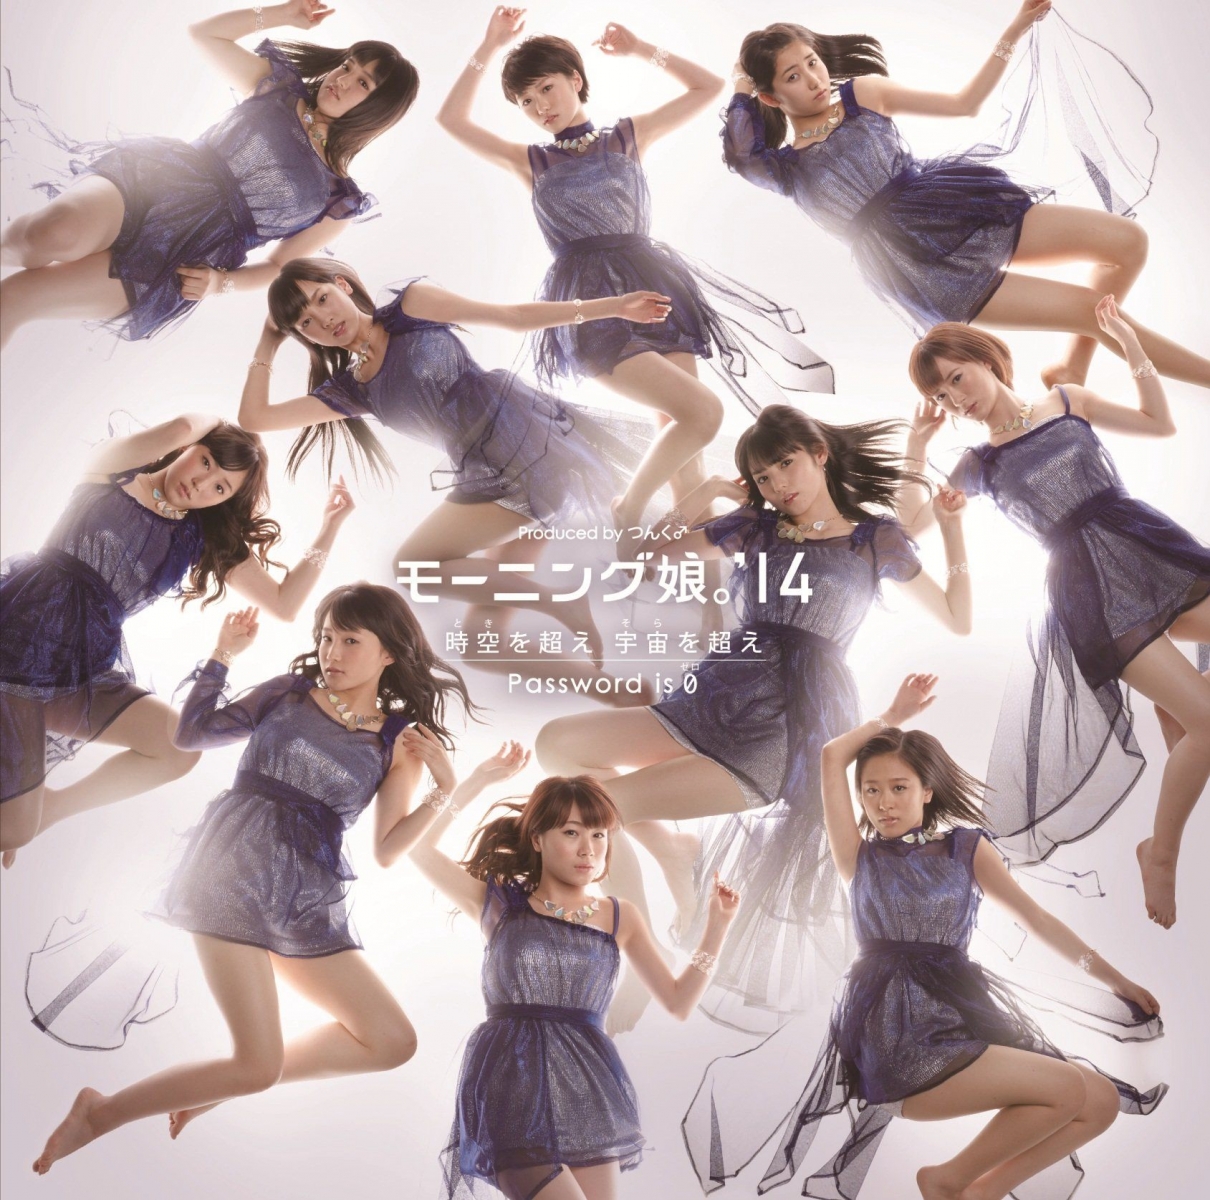 MM.’14 Wins 1st of Oricon Weekly Ranking 5 Consecutive times, Breaking Their Own Record